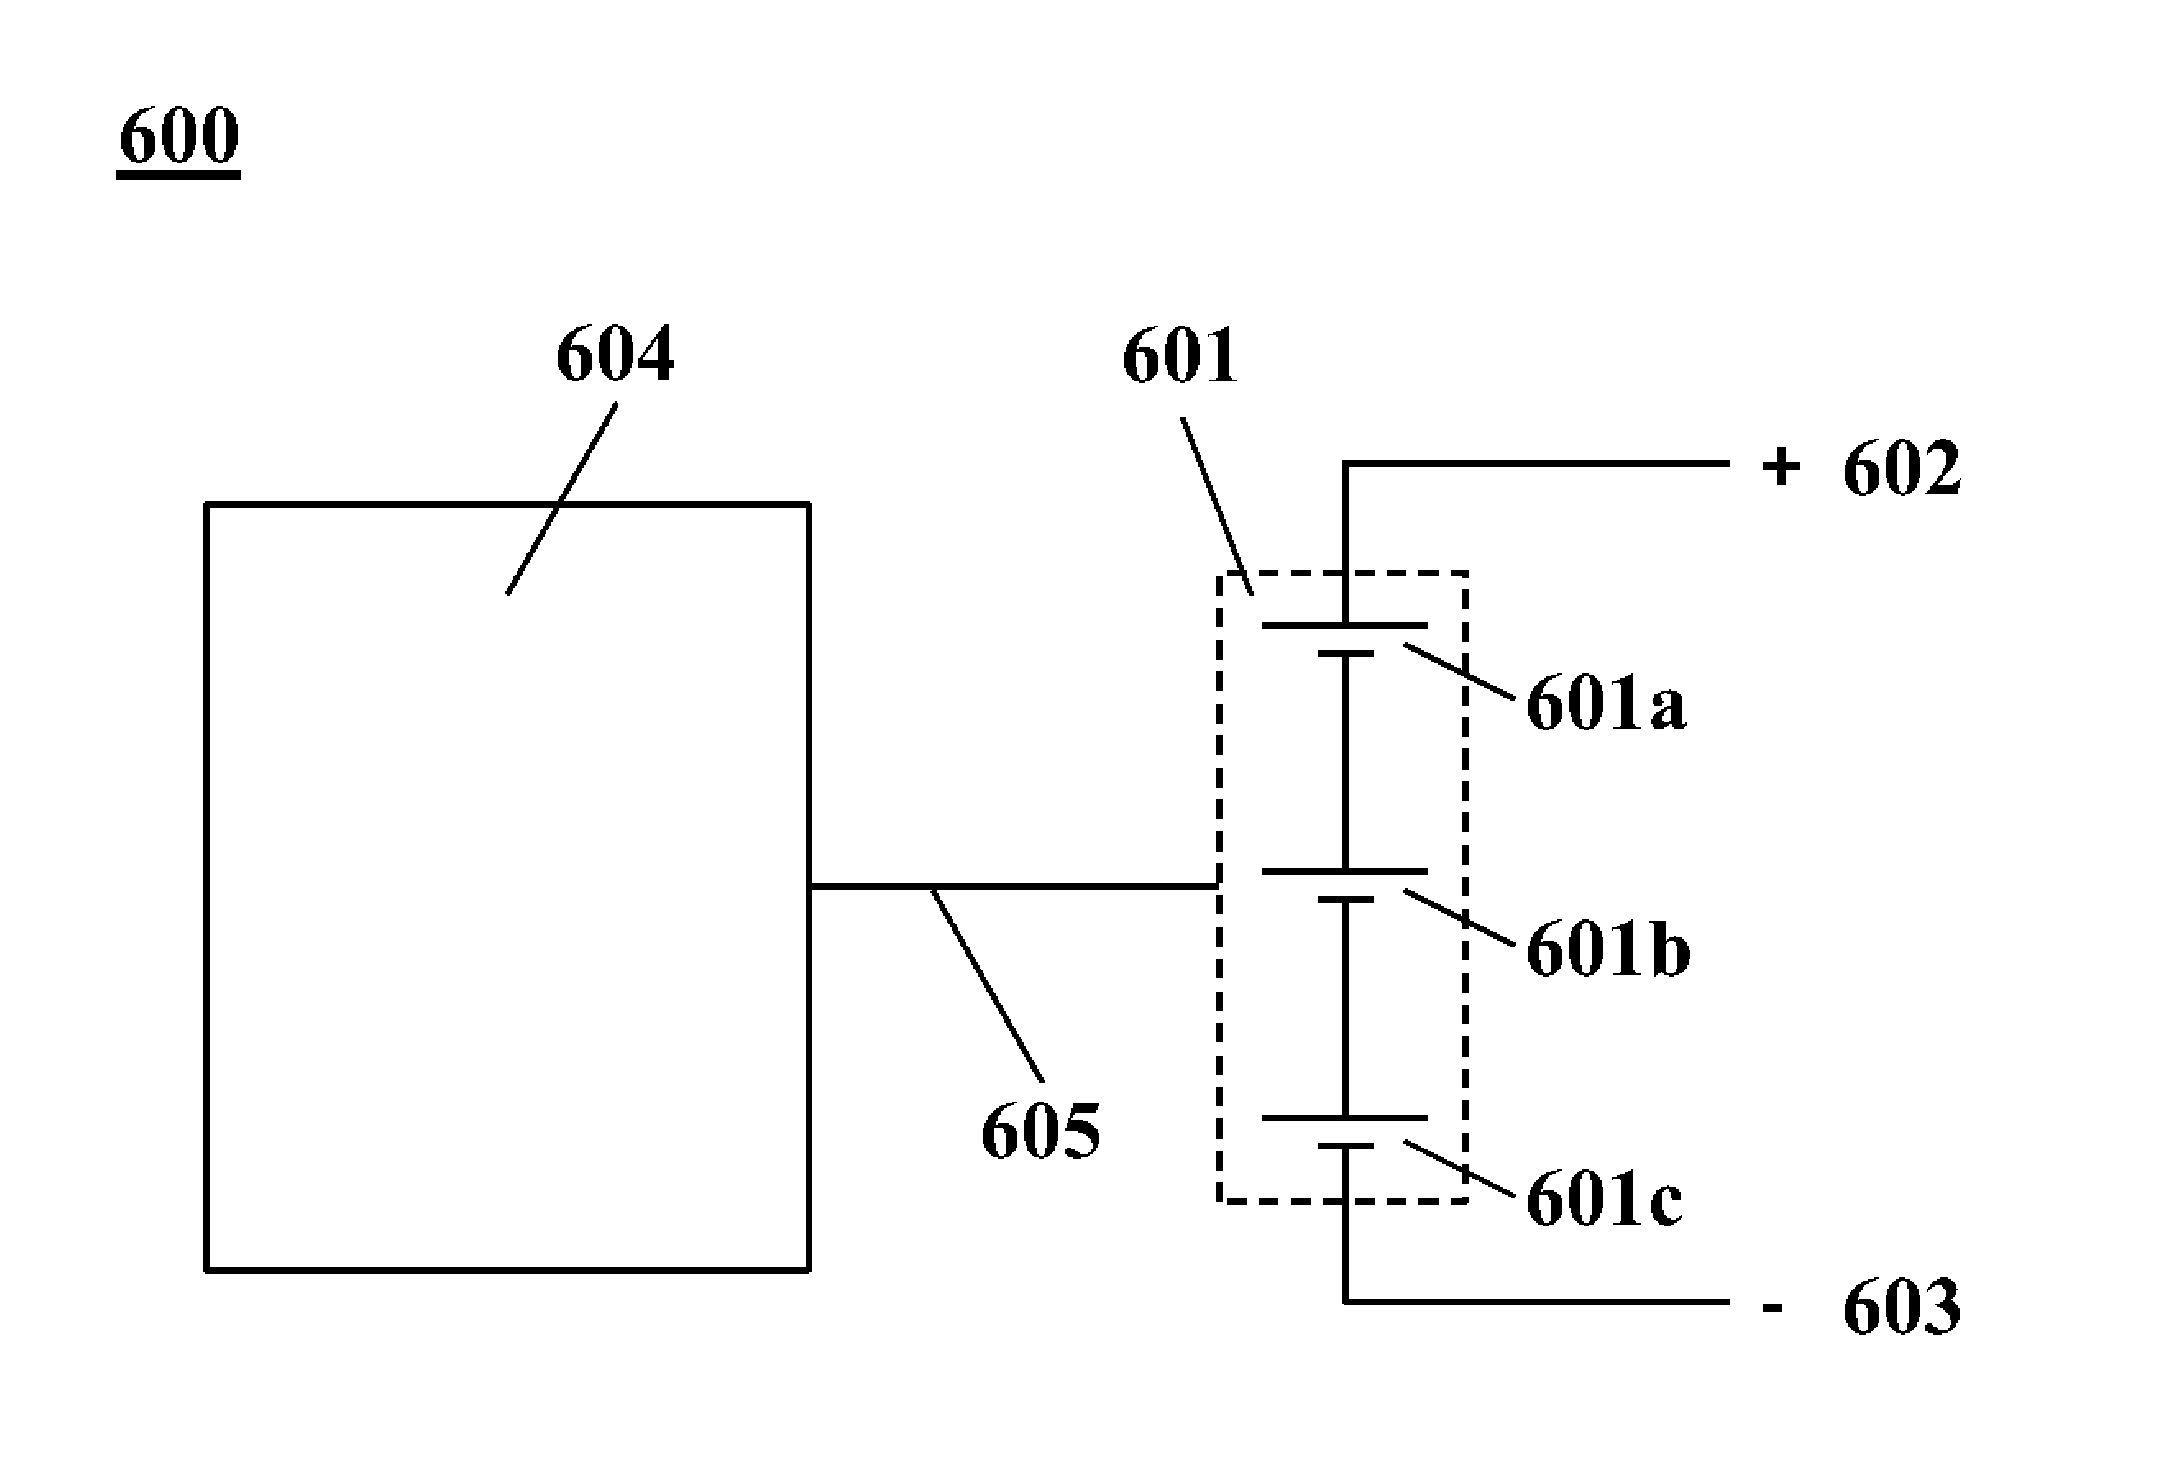 Battery management systems for energy storage devices